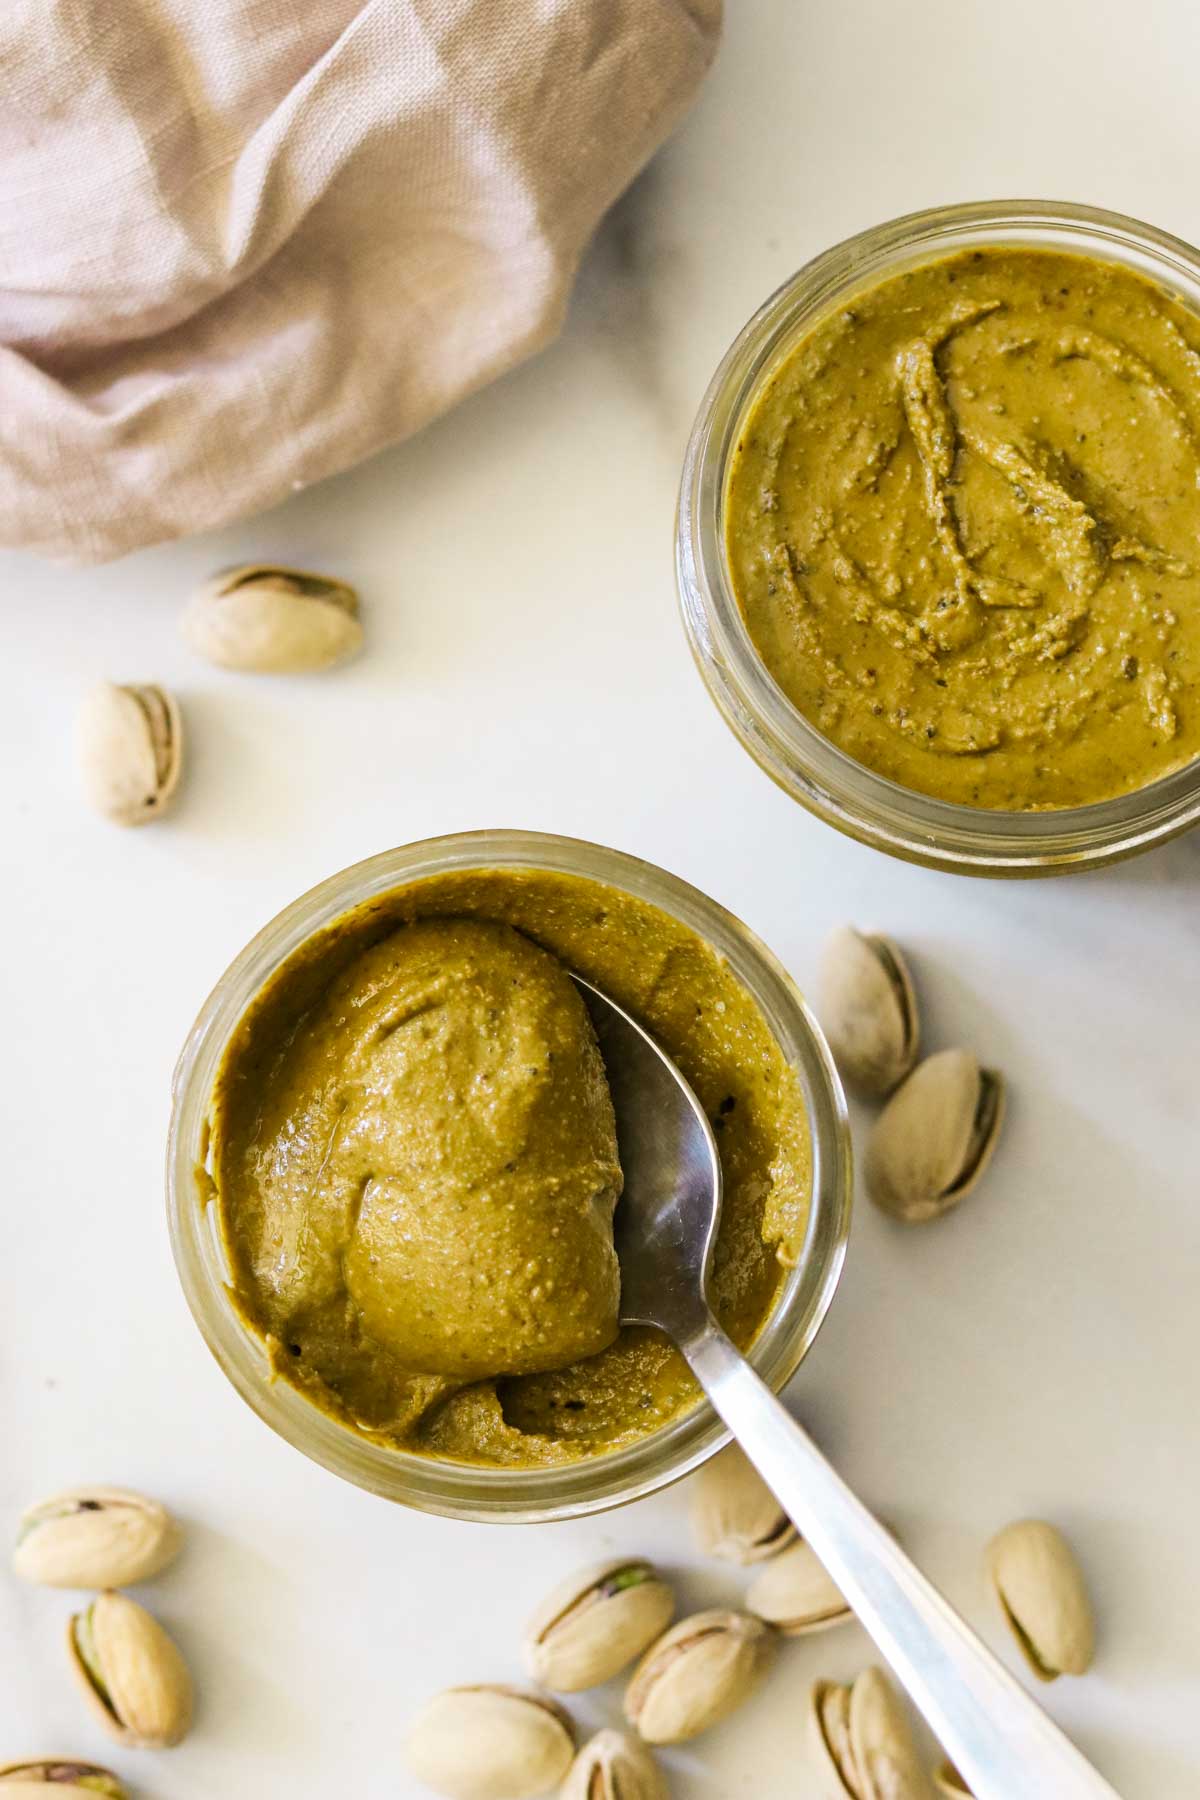 Spooning a big dollop of pistachio butter